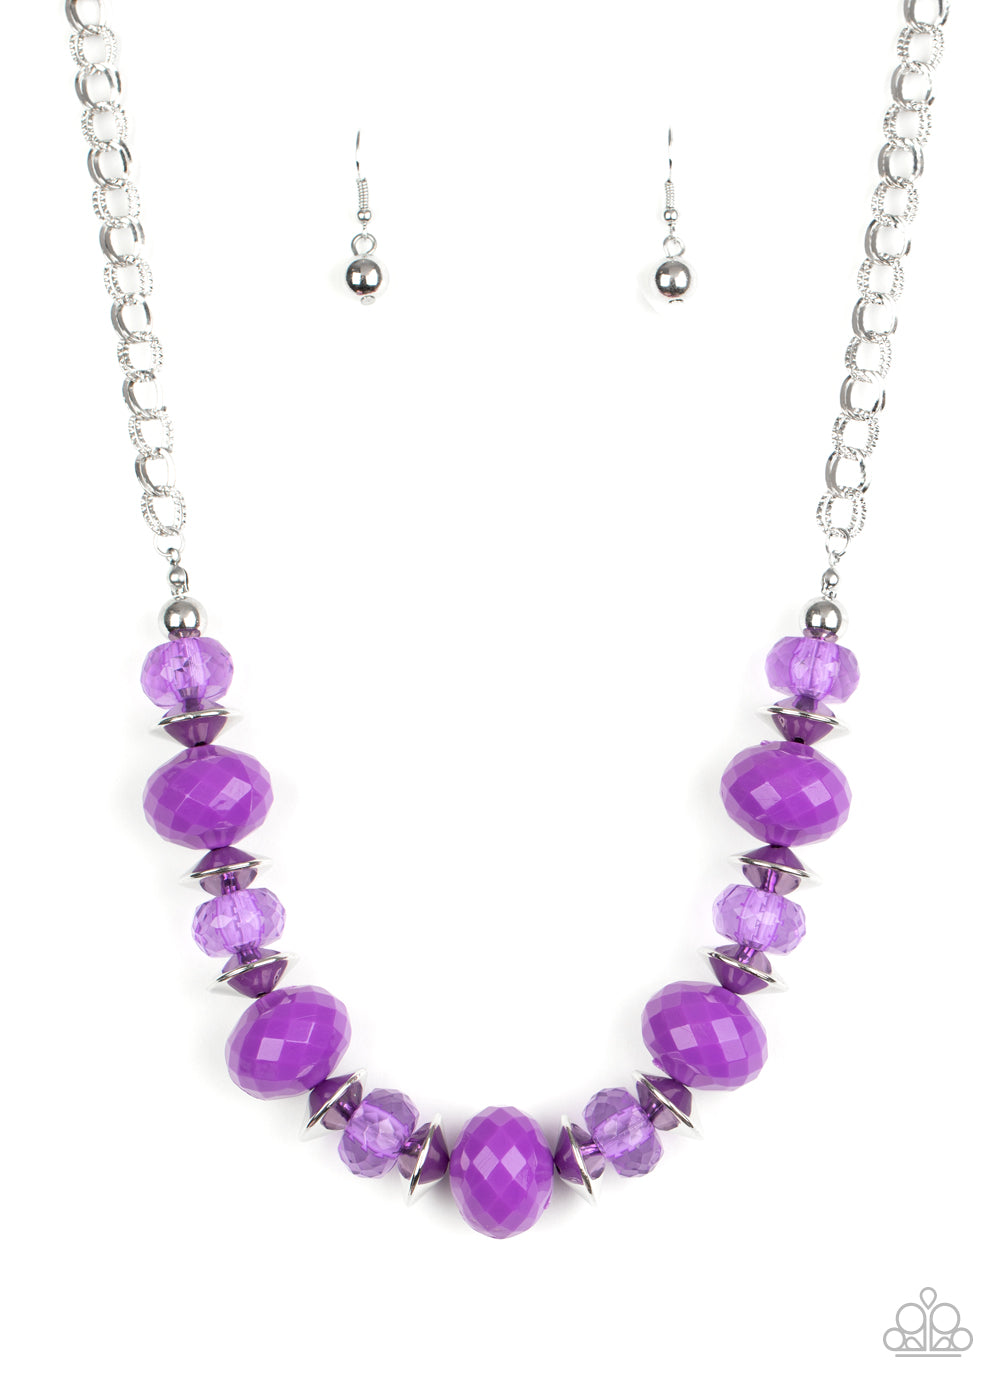 Saucer shaped silver beads trickle between faceted purple beads and crystal-like beads along an invisible wire, creating a glamorous display below the collar. Features an adjustable clasp closure.